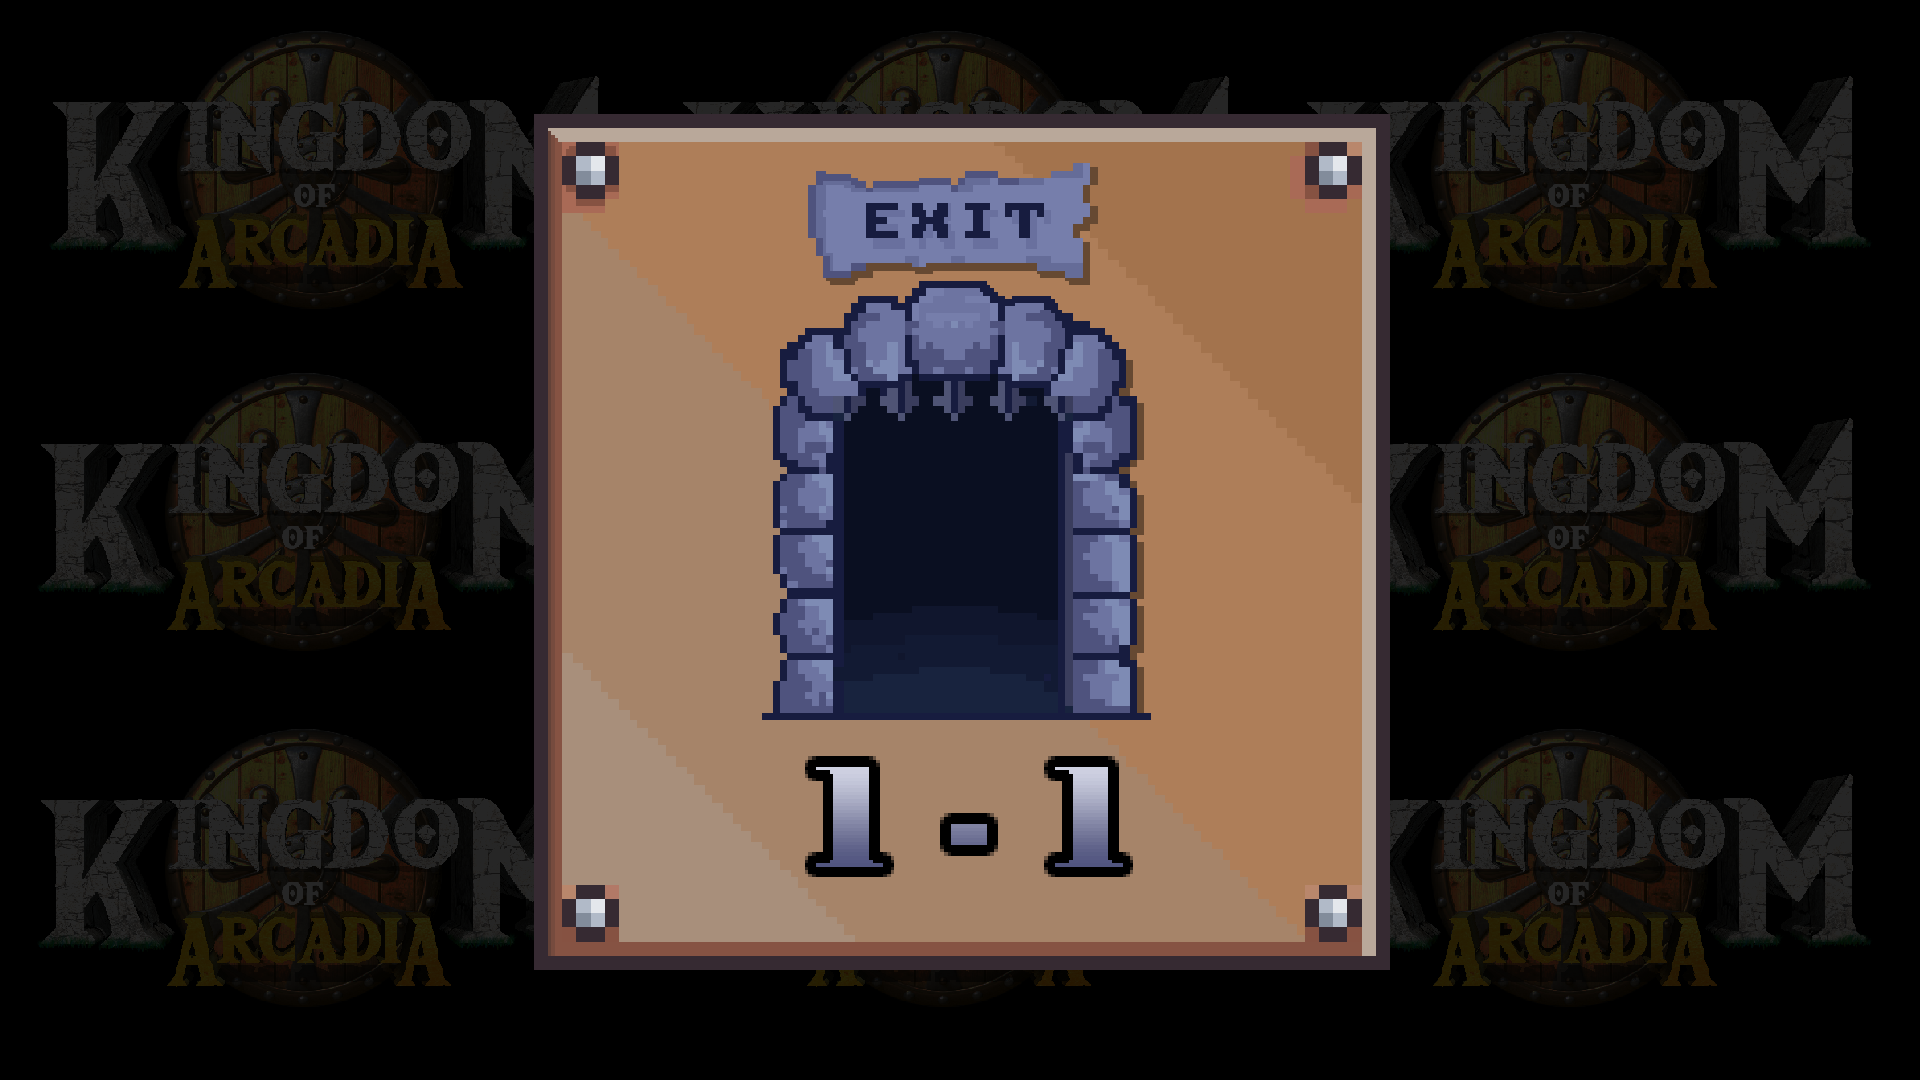 Icon for Level 1-1